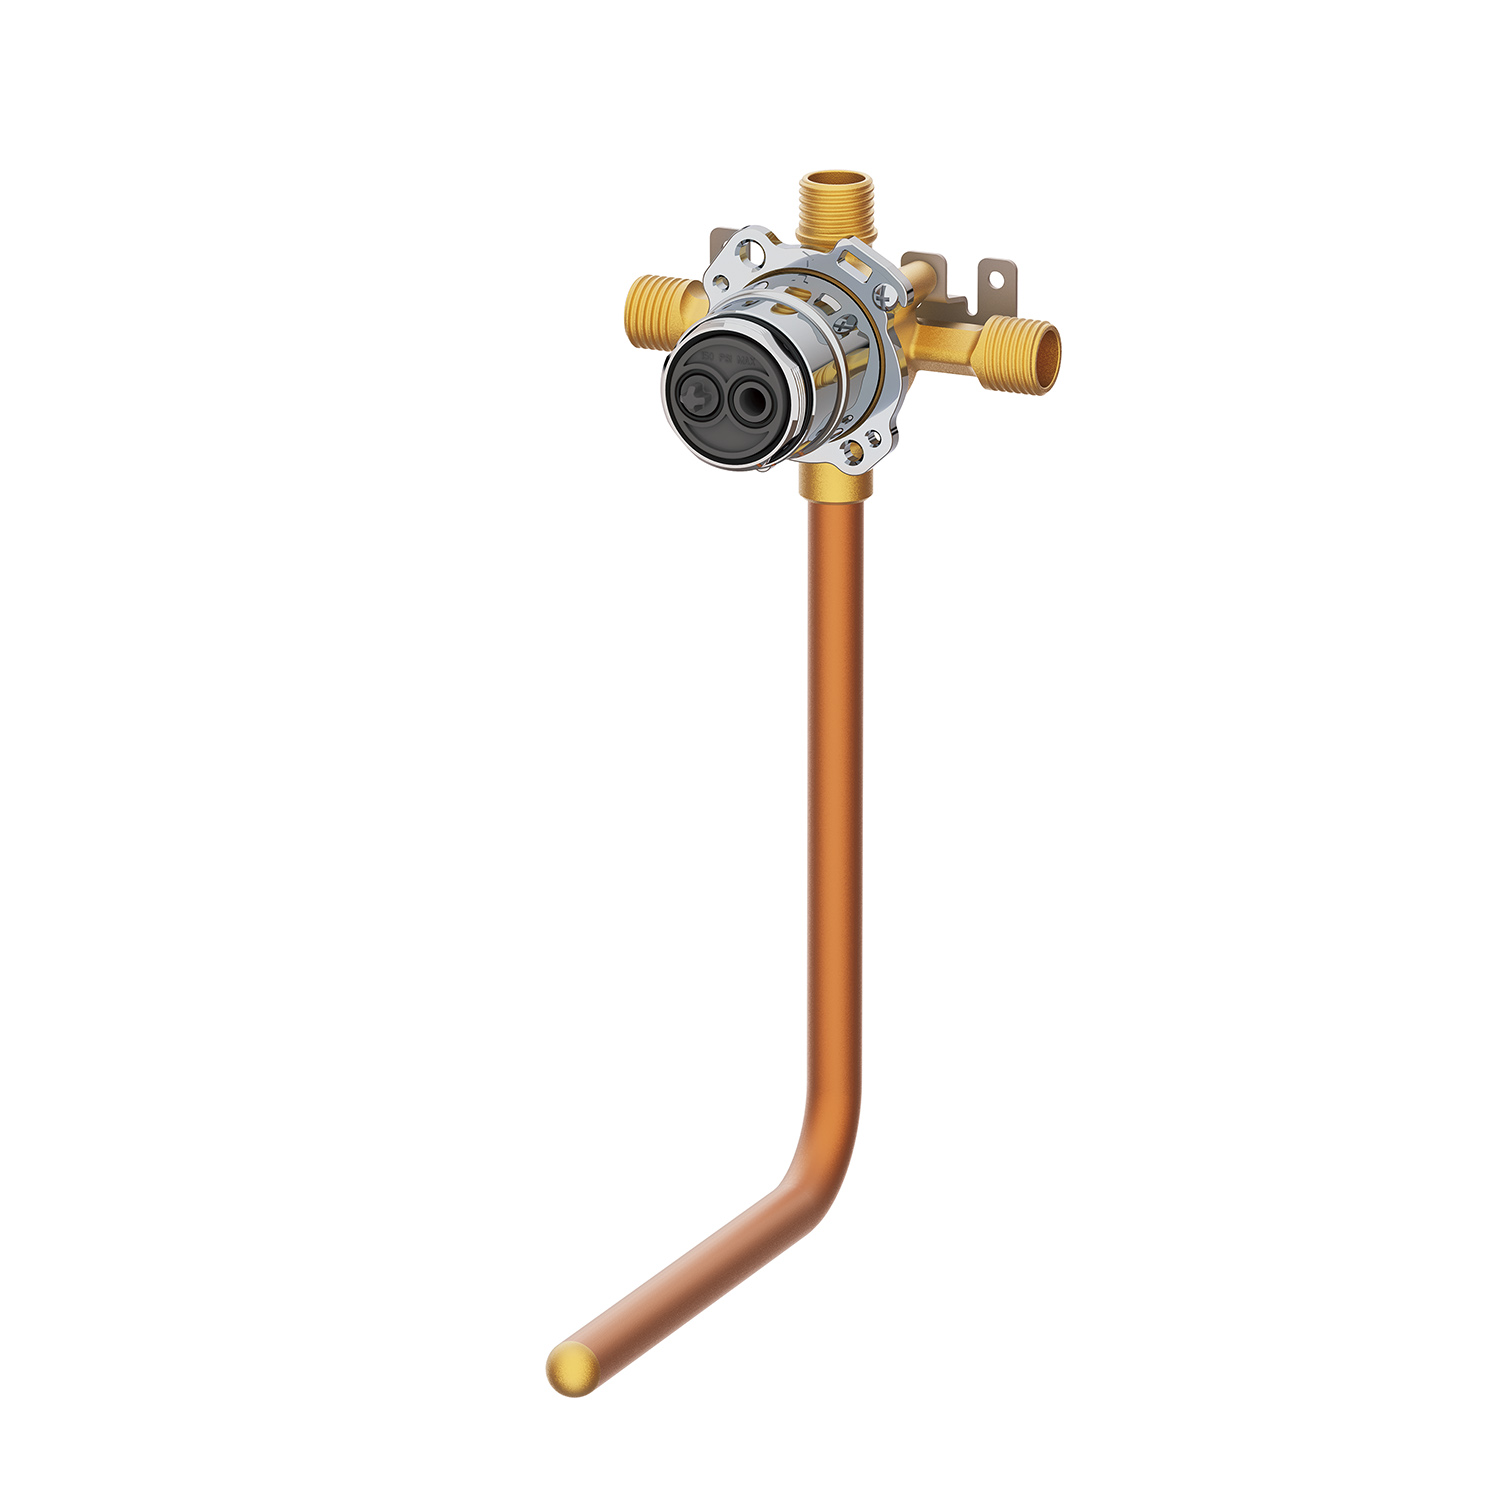 Danze G00GS505T Treysta Tub & Shower Valve- Horizontal Inputs WITHOUT Stops WITH Stub-out - IPS/Sweat